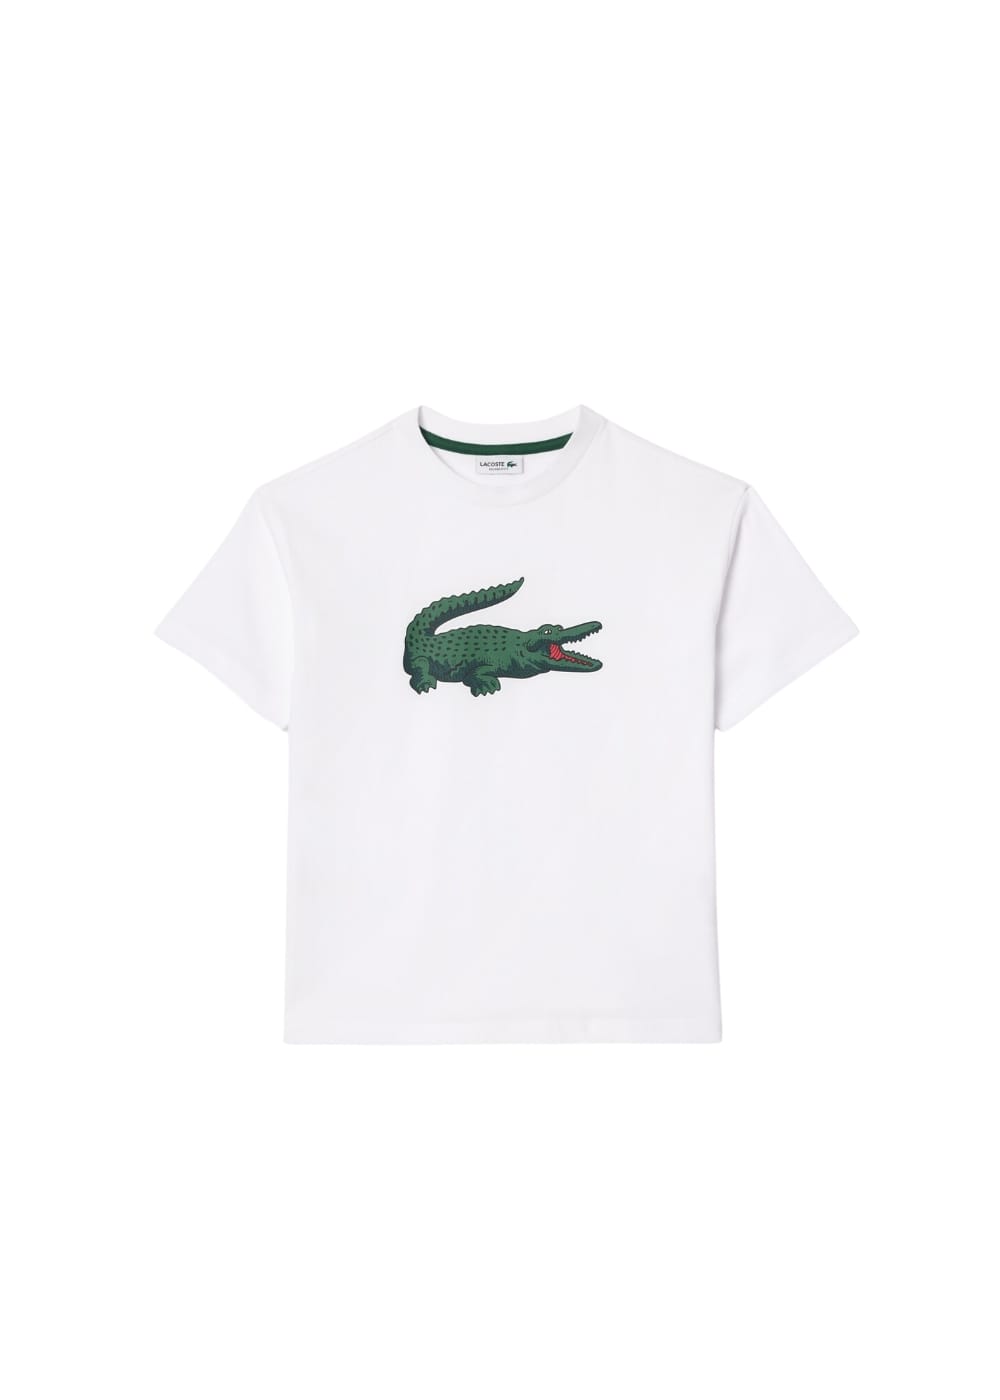 Featured image for “Lacoste T-shirt con Stampa”